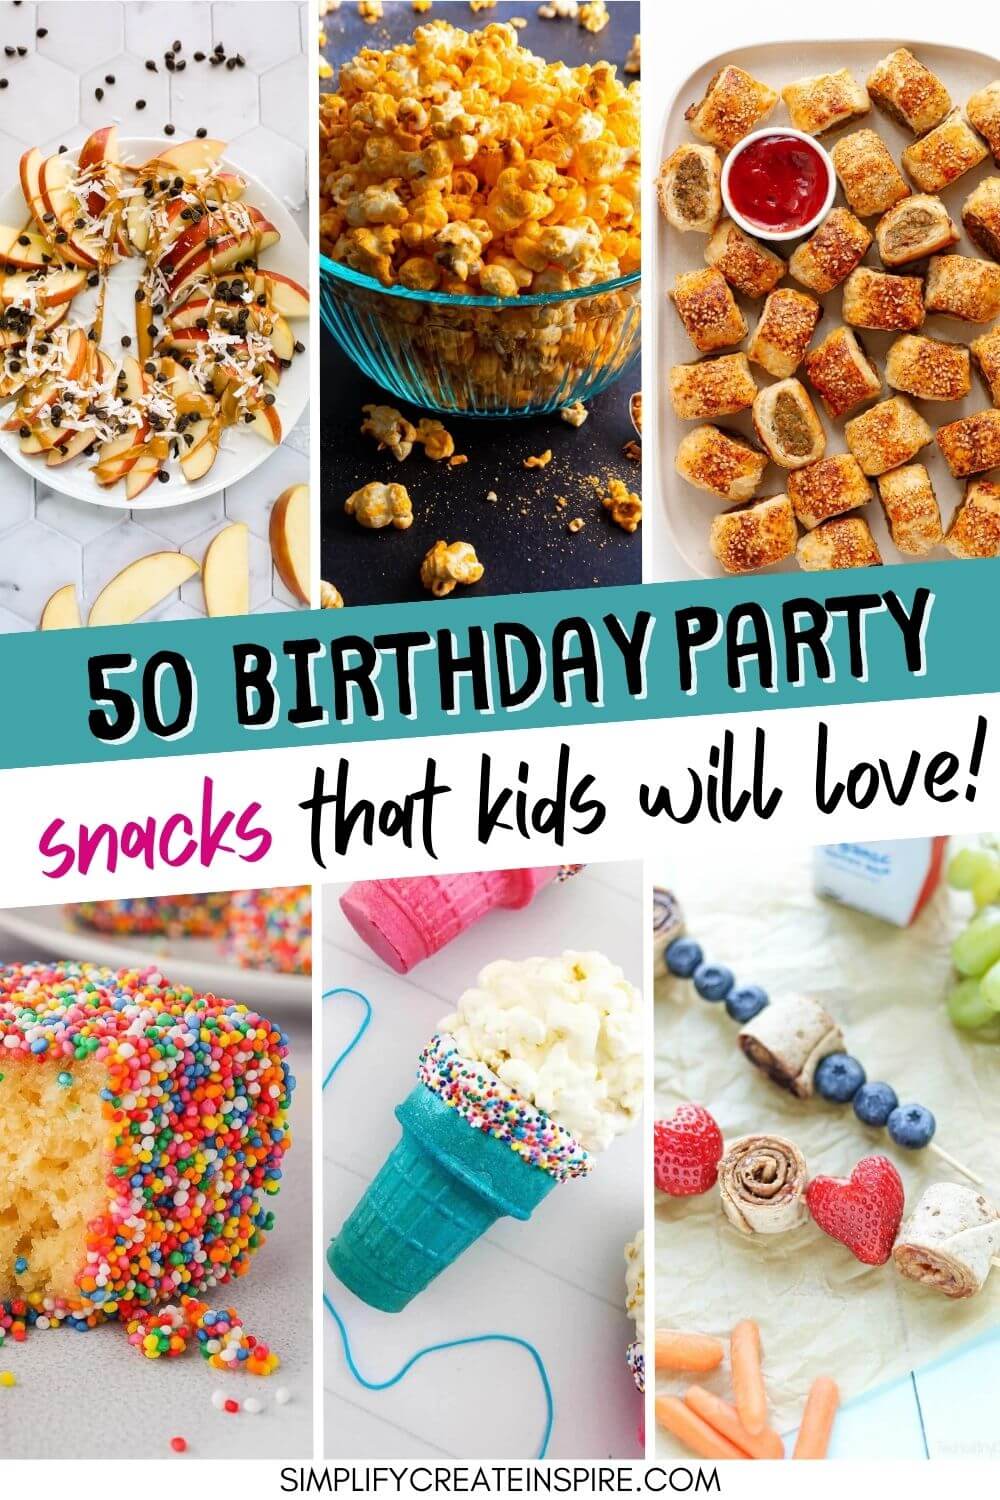 Pinterest image - text reads 50 birthday party snacks that kids will love